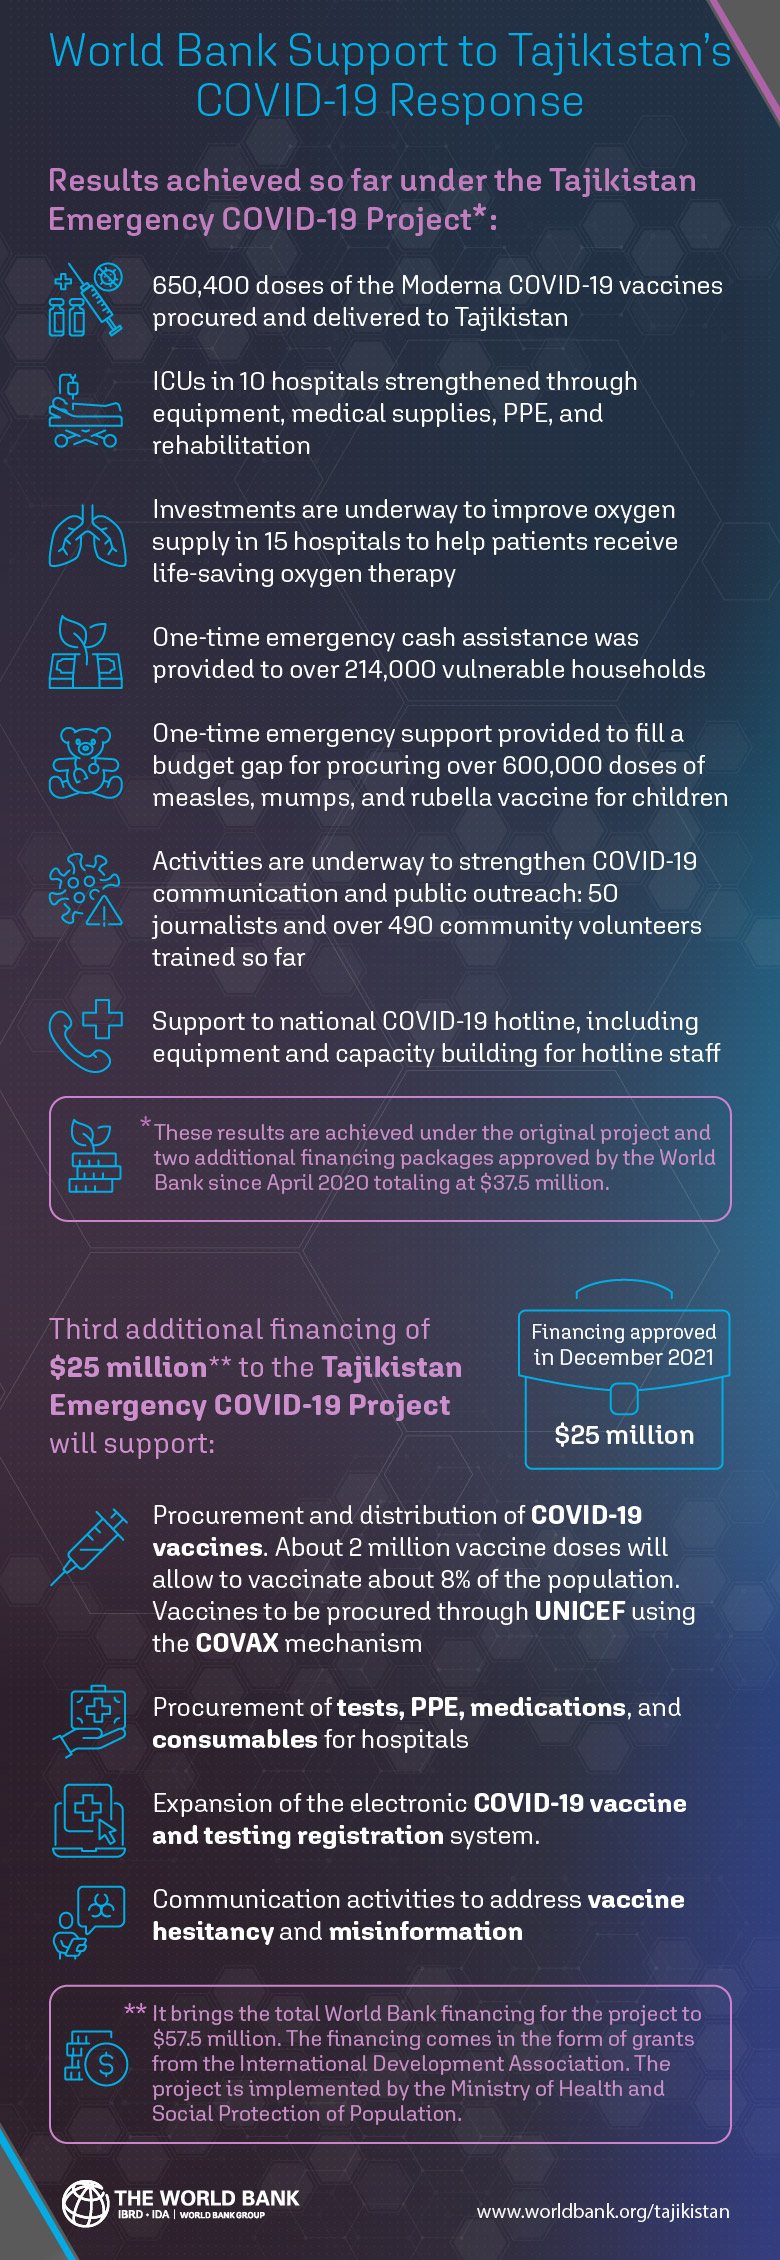 Infographic on the World Bank Support to Tajikistan’s COVID-19 Response